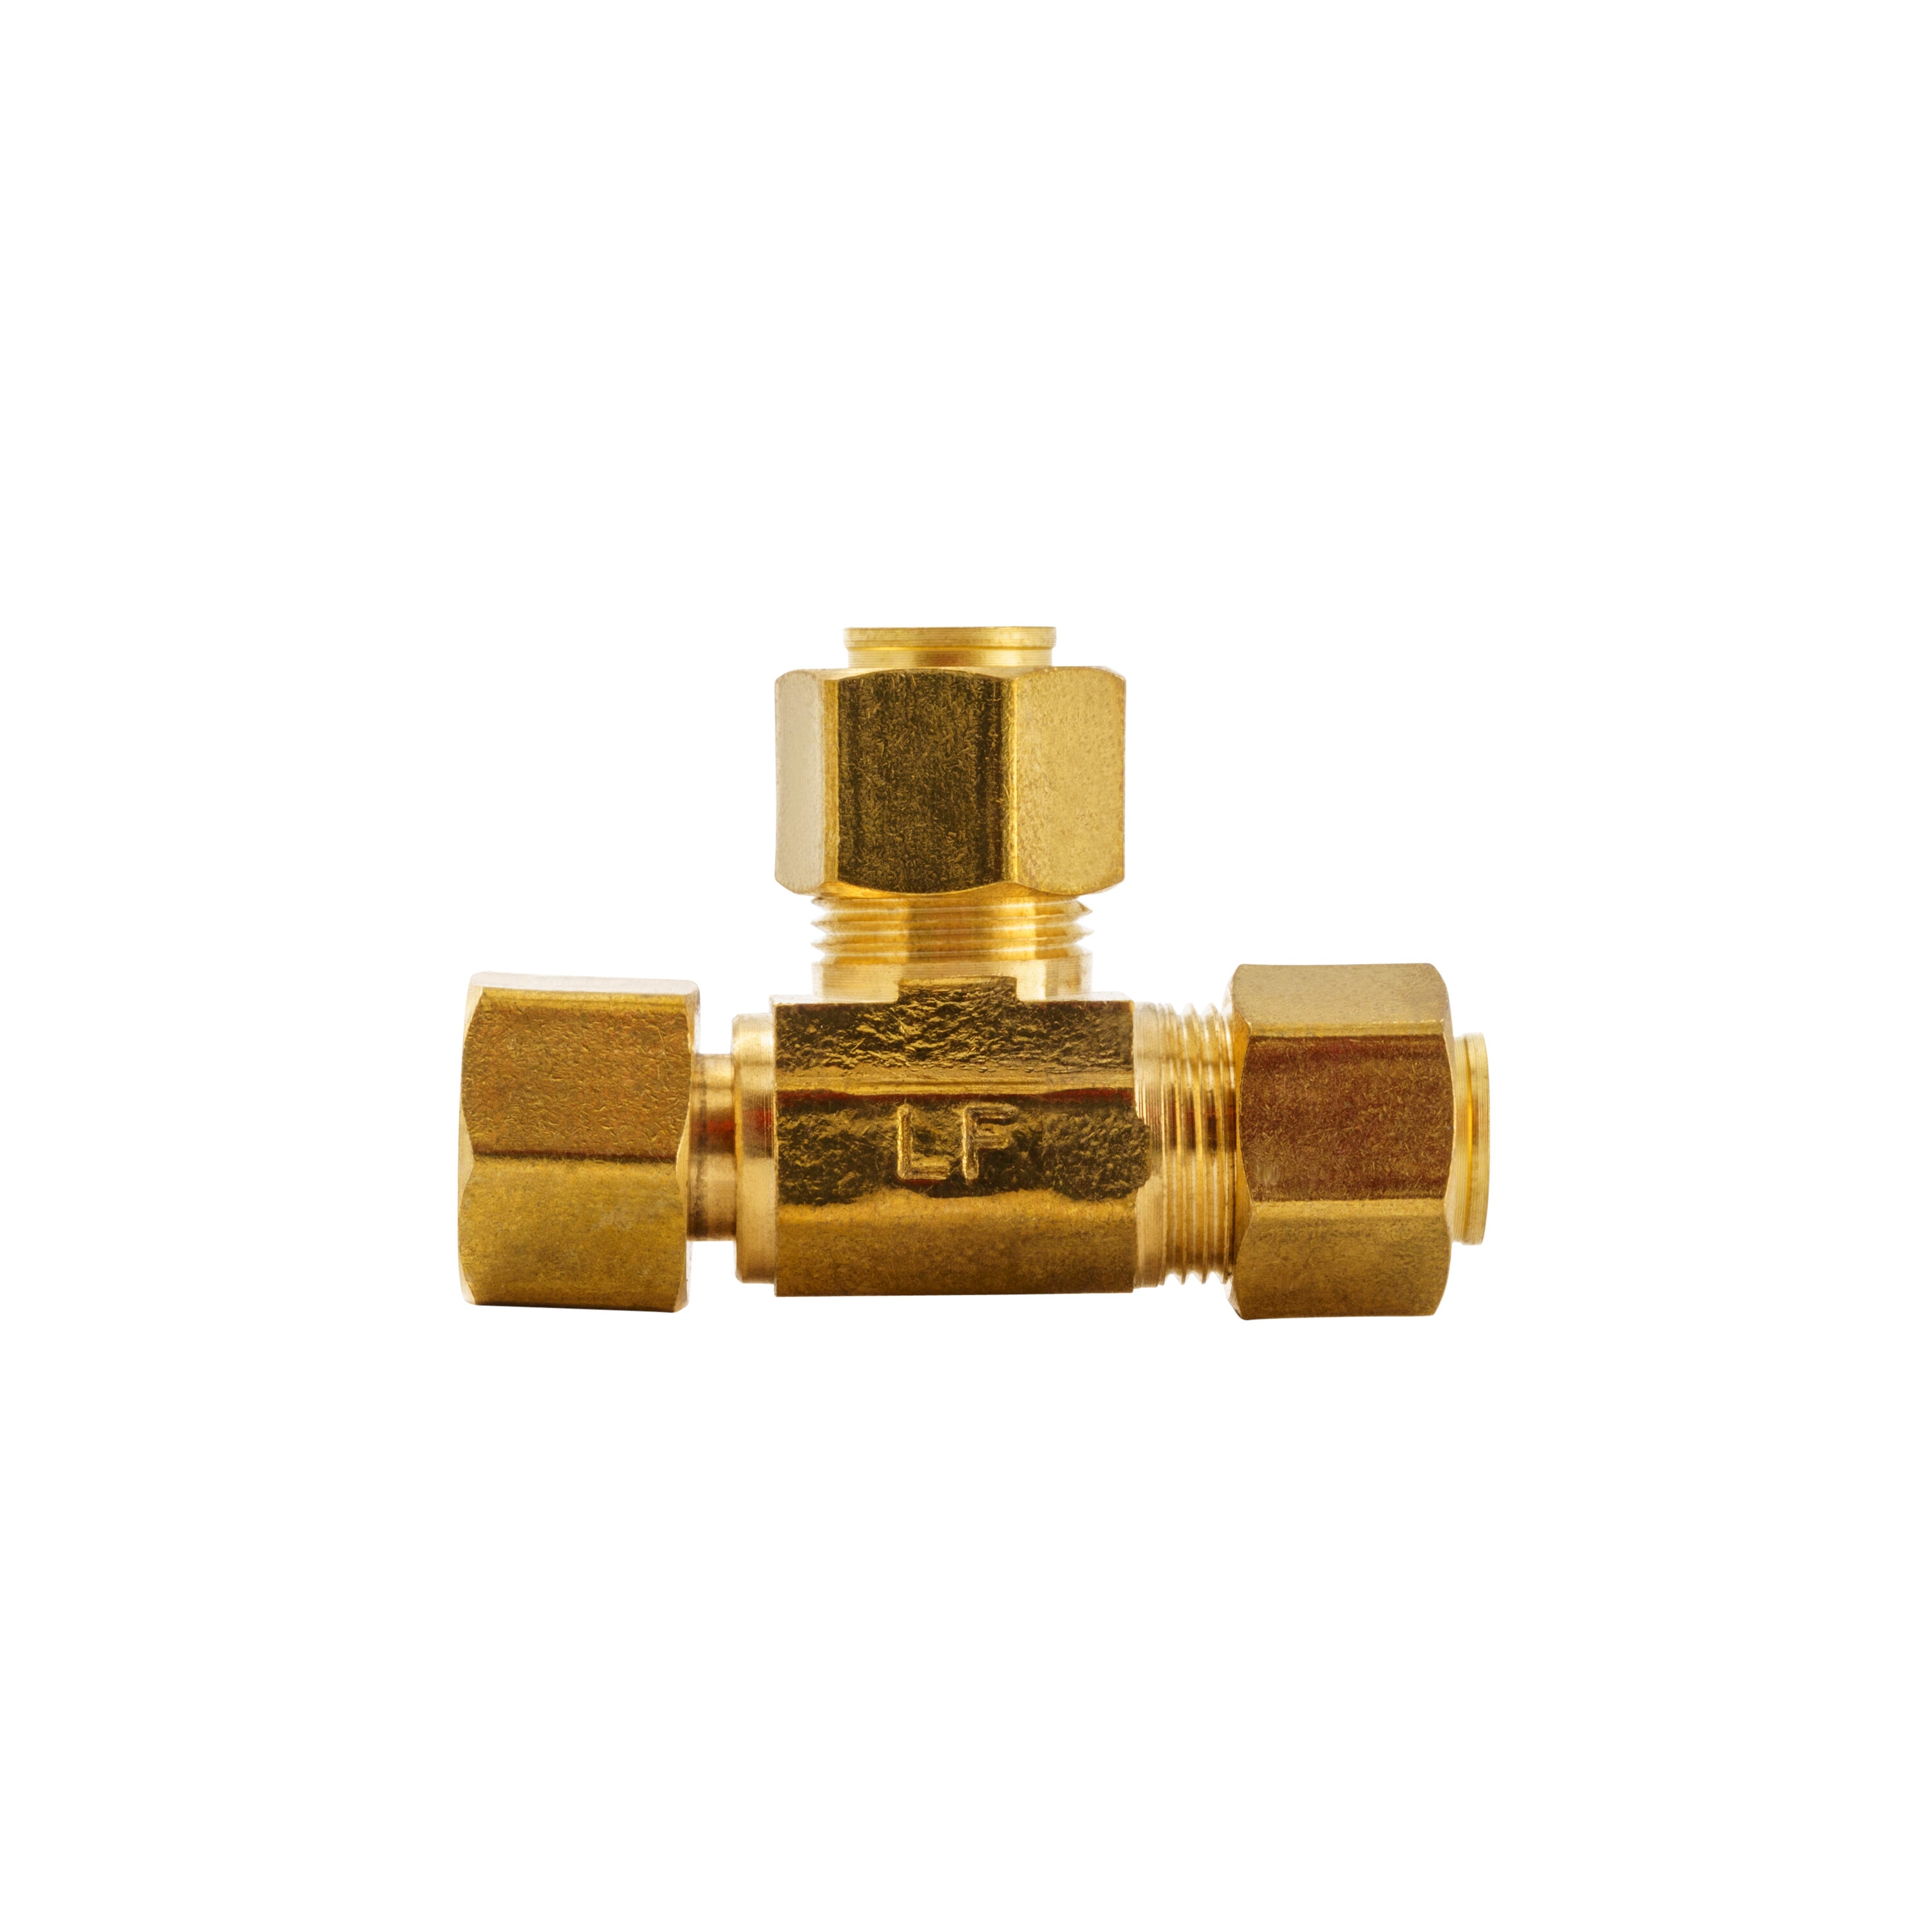 Proline Series 1/4-in x 1/4-in Compression Coupling Union Fitting in the  Brass Fittings department at